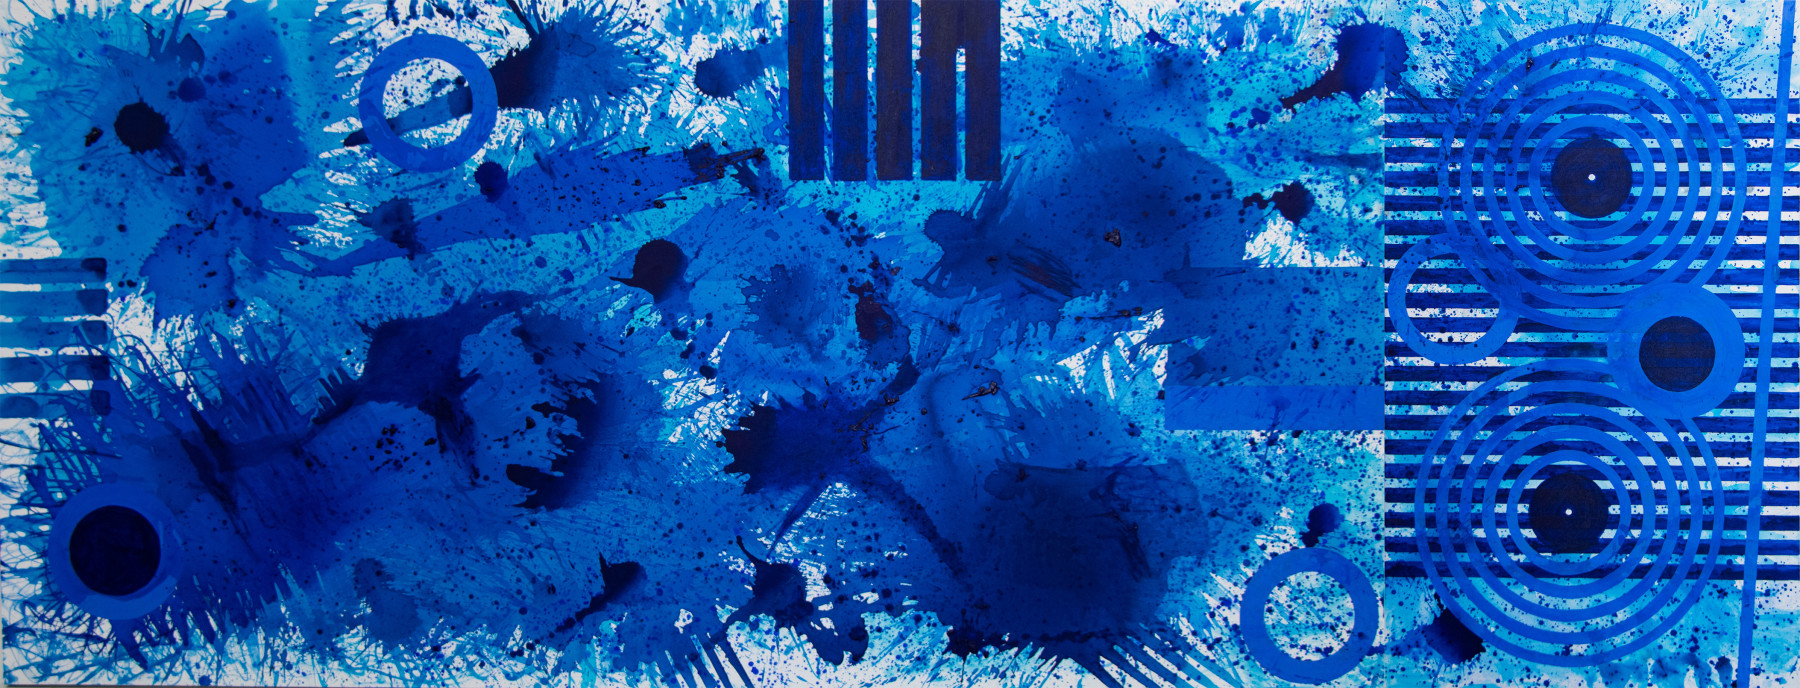 J. Steven Manolis, Splash, 2020, 60 x 156 inches, Acrylic painting on canvas, Extra large Wall Art,Blue Abstract Art for sale at Manolis Projects Art Gallery, Miami, Fl